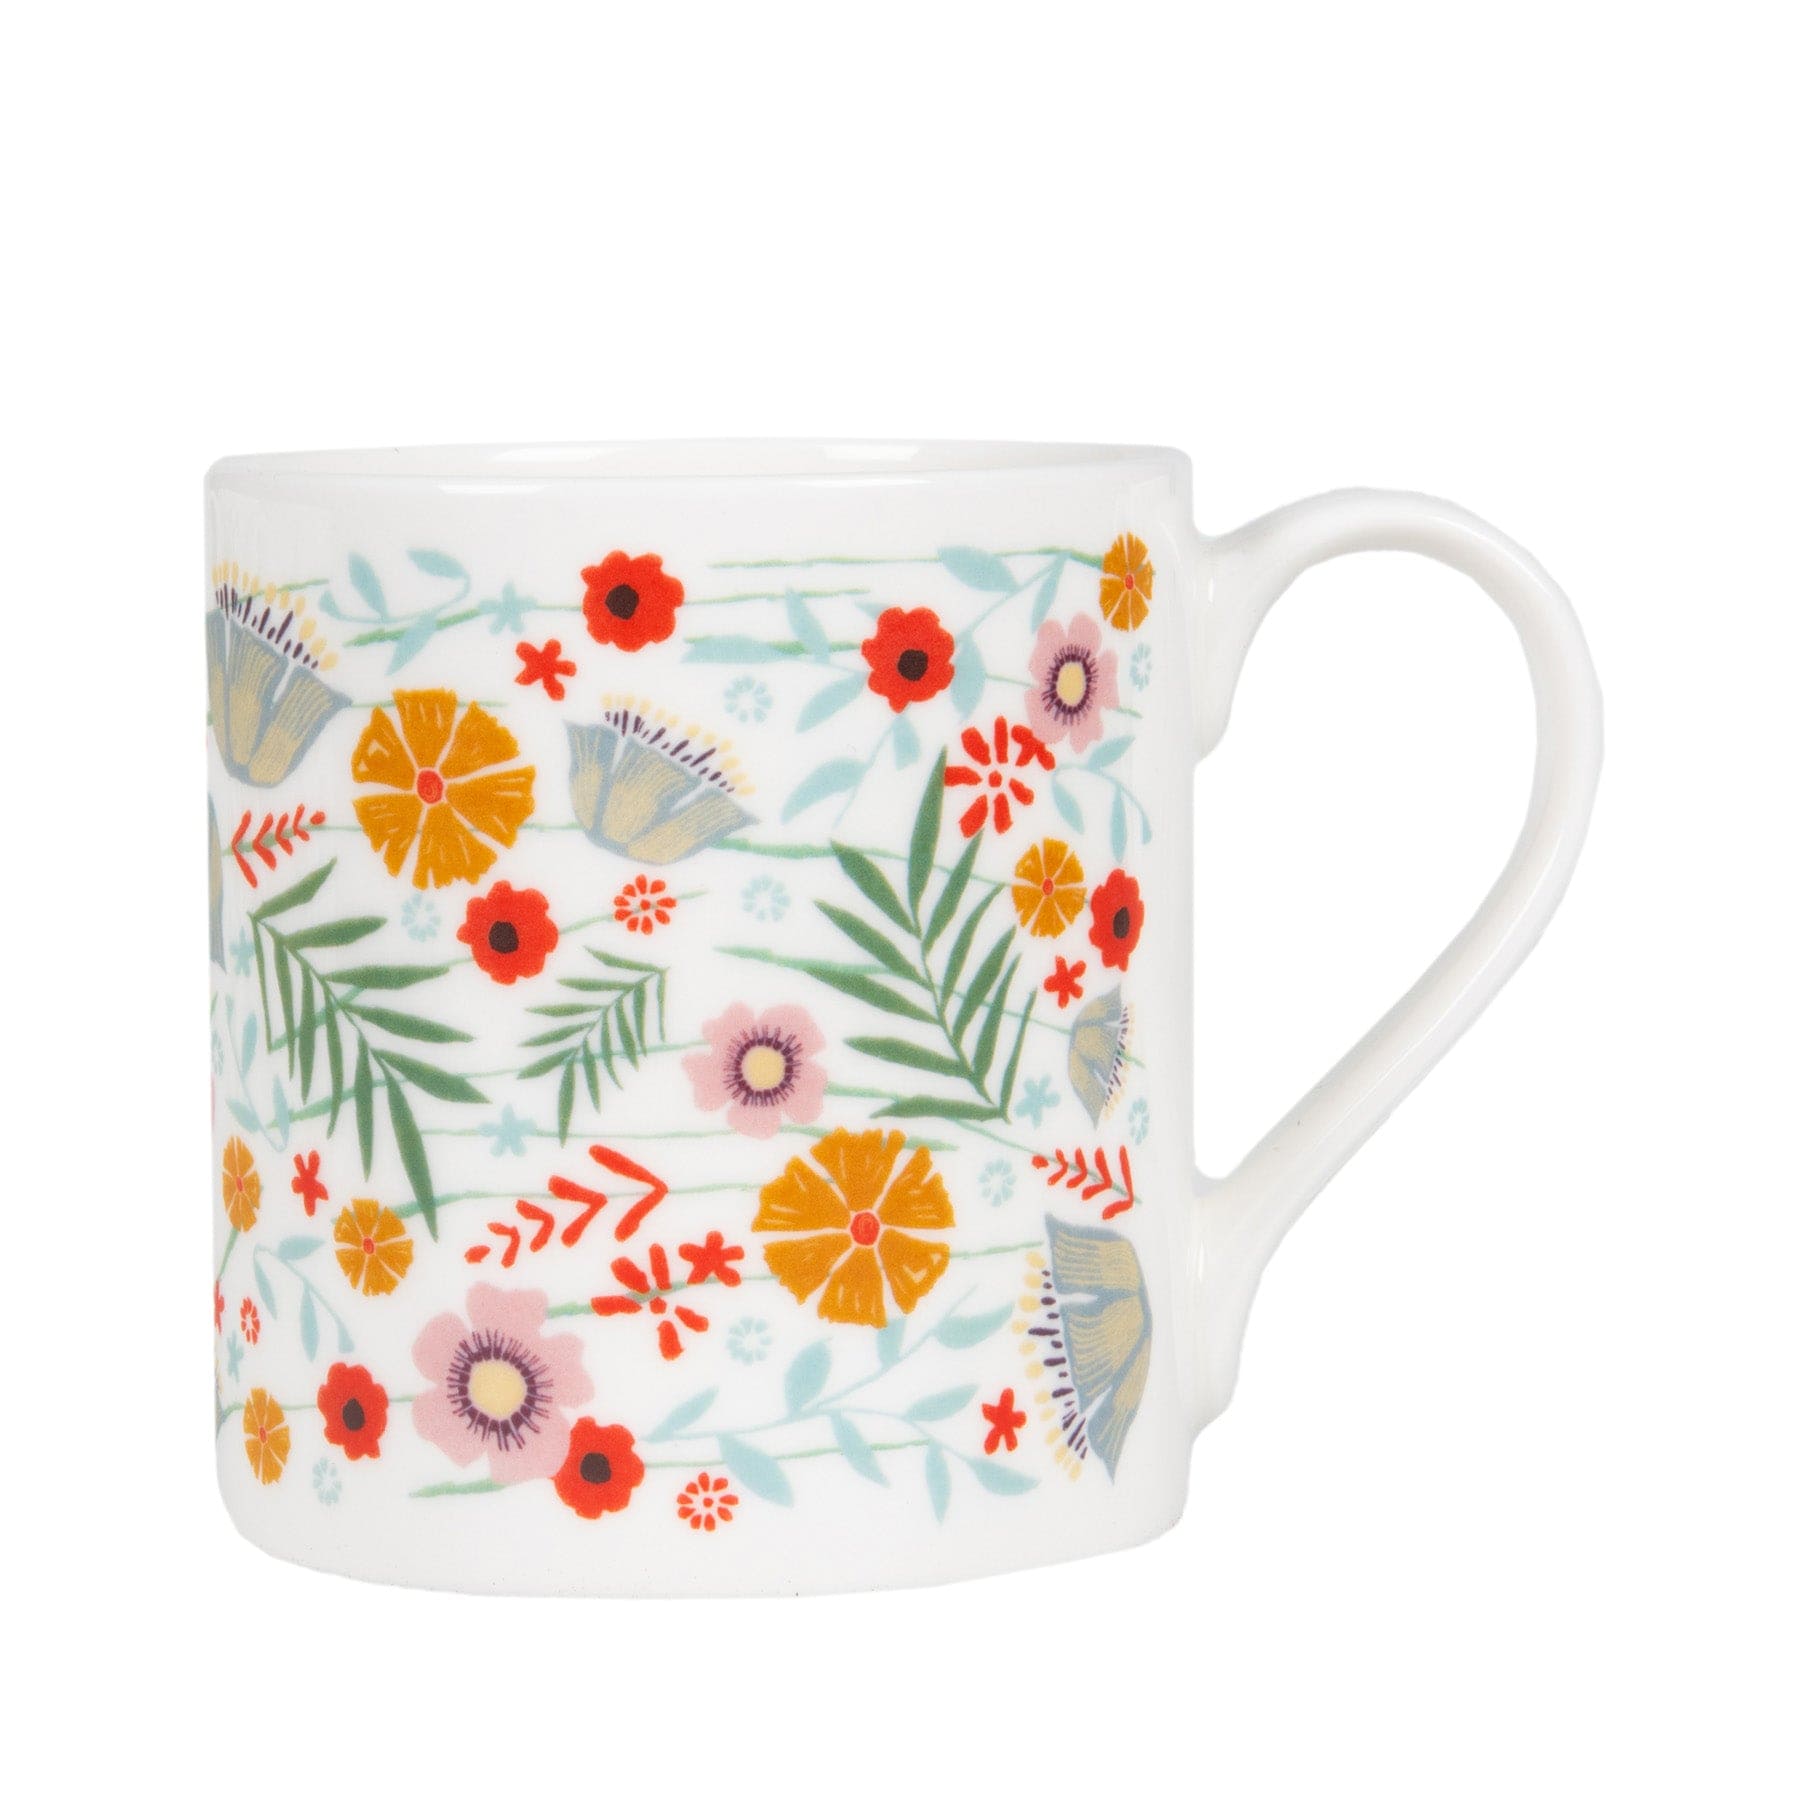 Floral pattern ceramic mug with orange slices and wildflowers design on white background